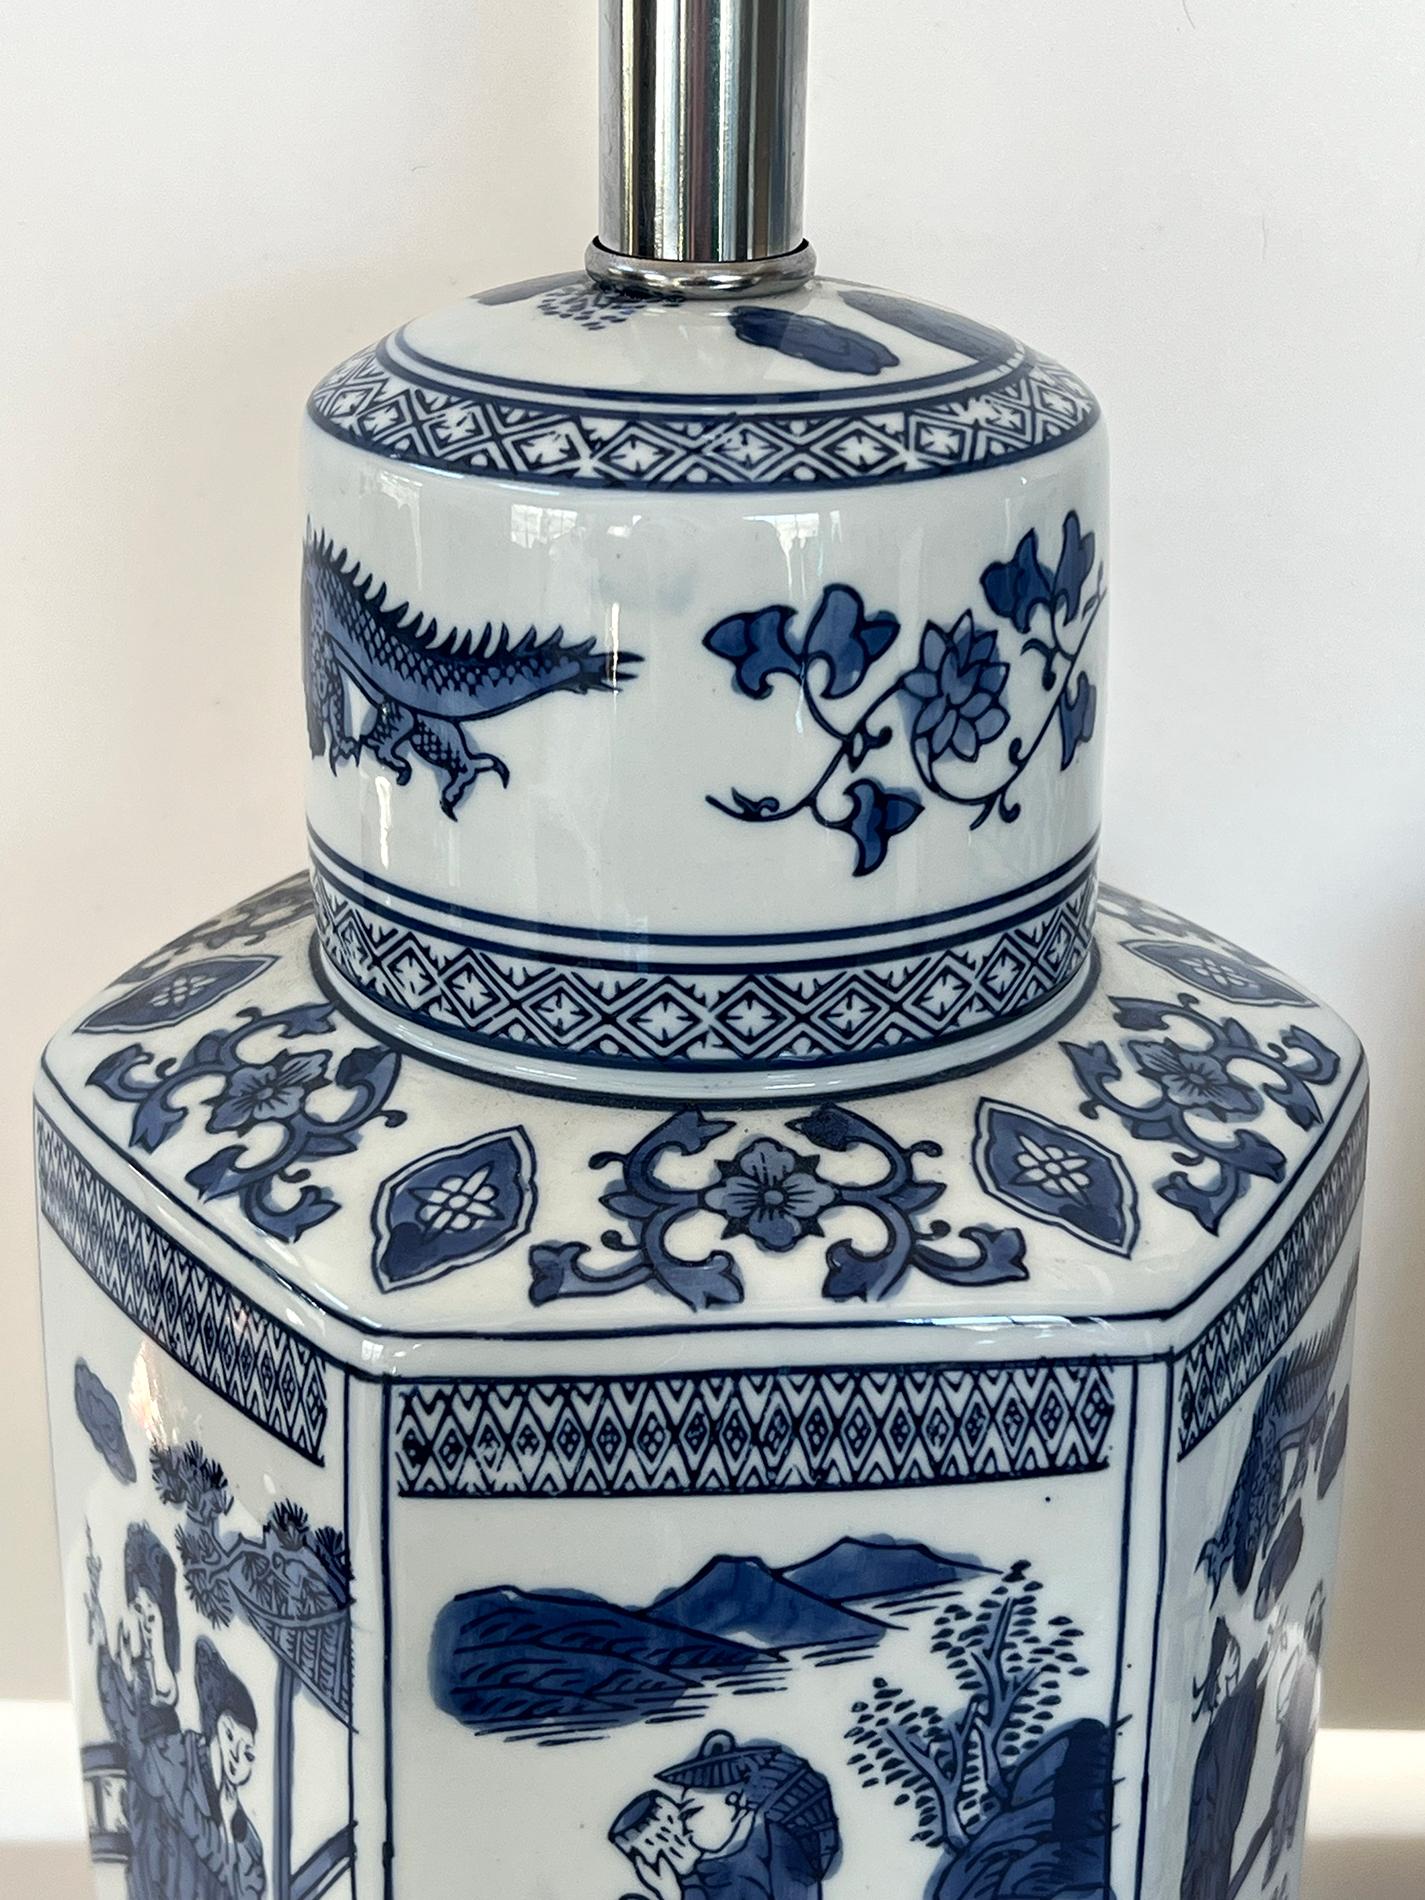 each ginger jar decorated with individuals at varied pursuits with dragons, clouds, and floral vines